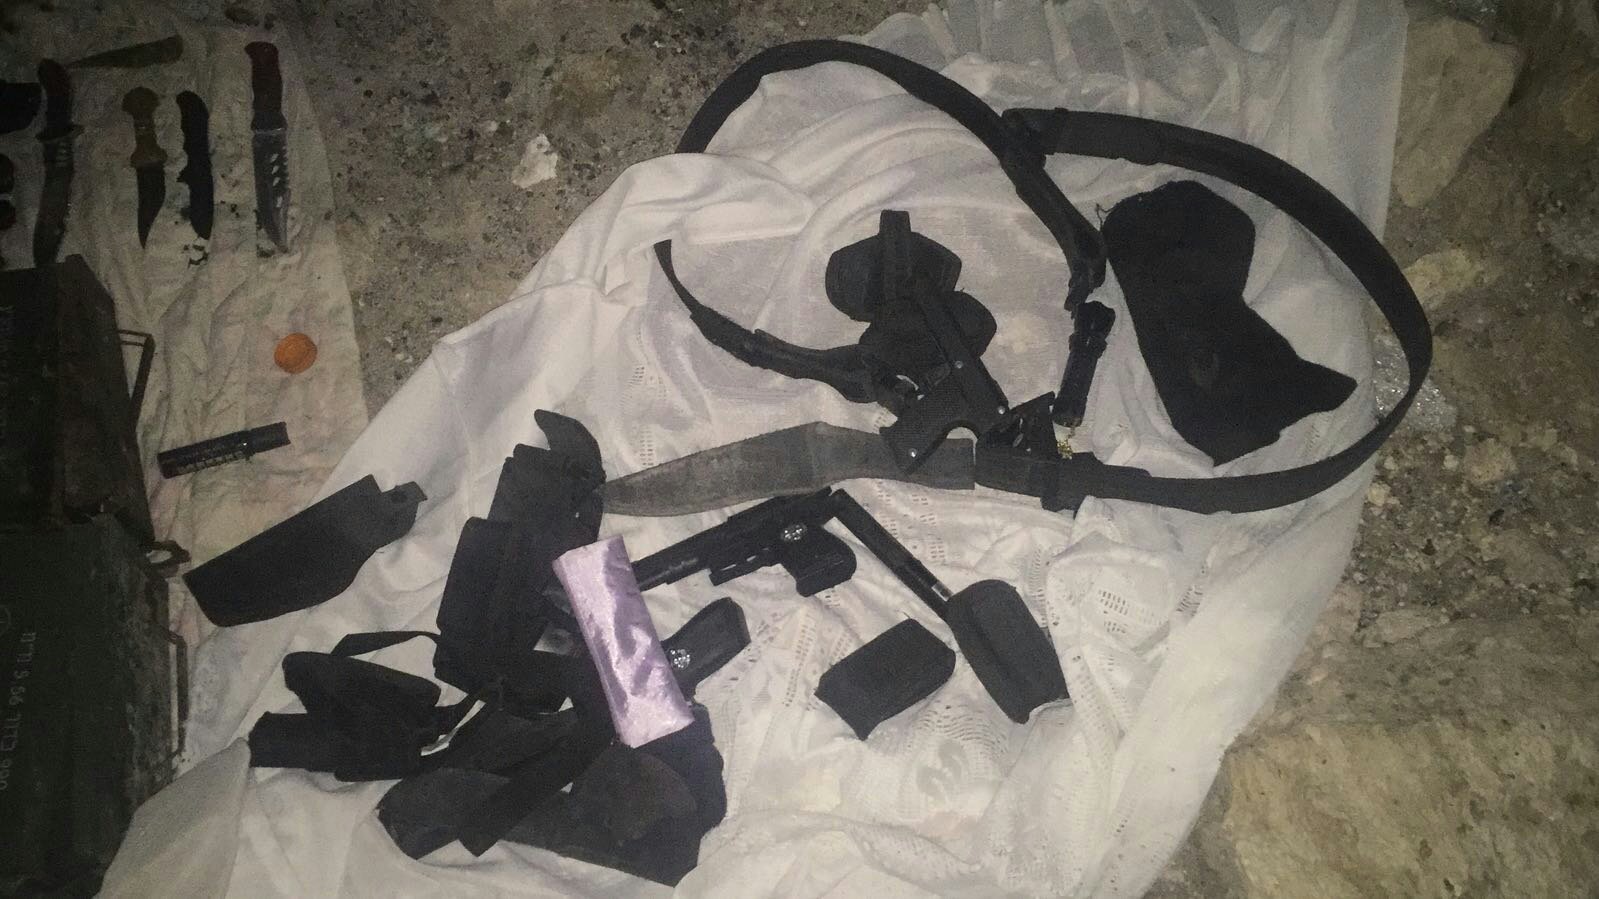 Explosives, ammunition and weapons caught in the operation.- weapon